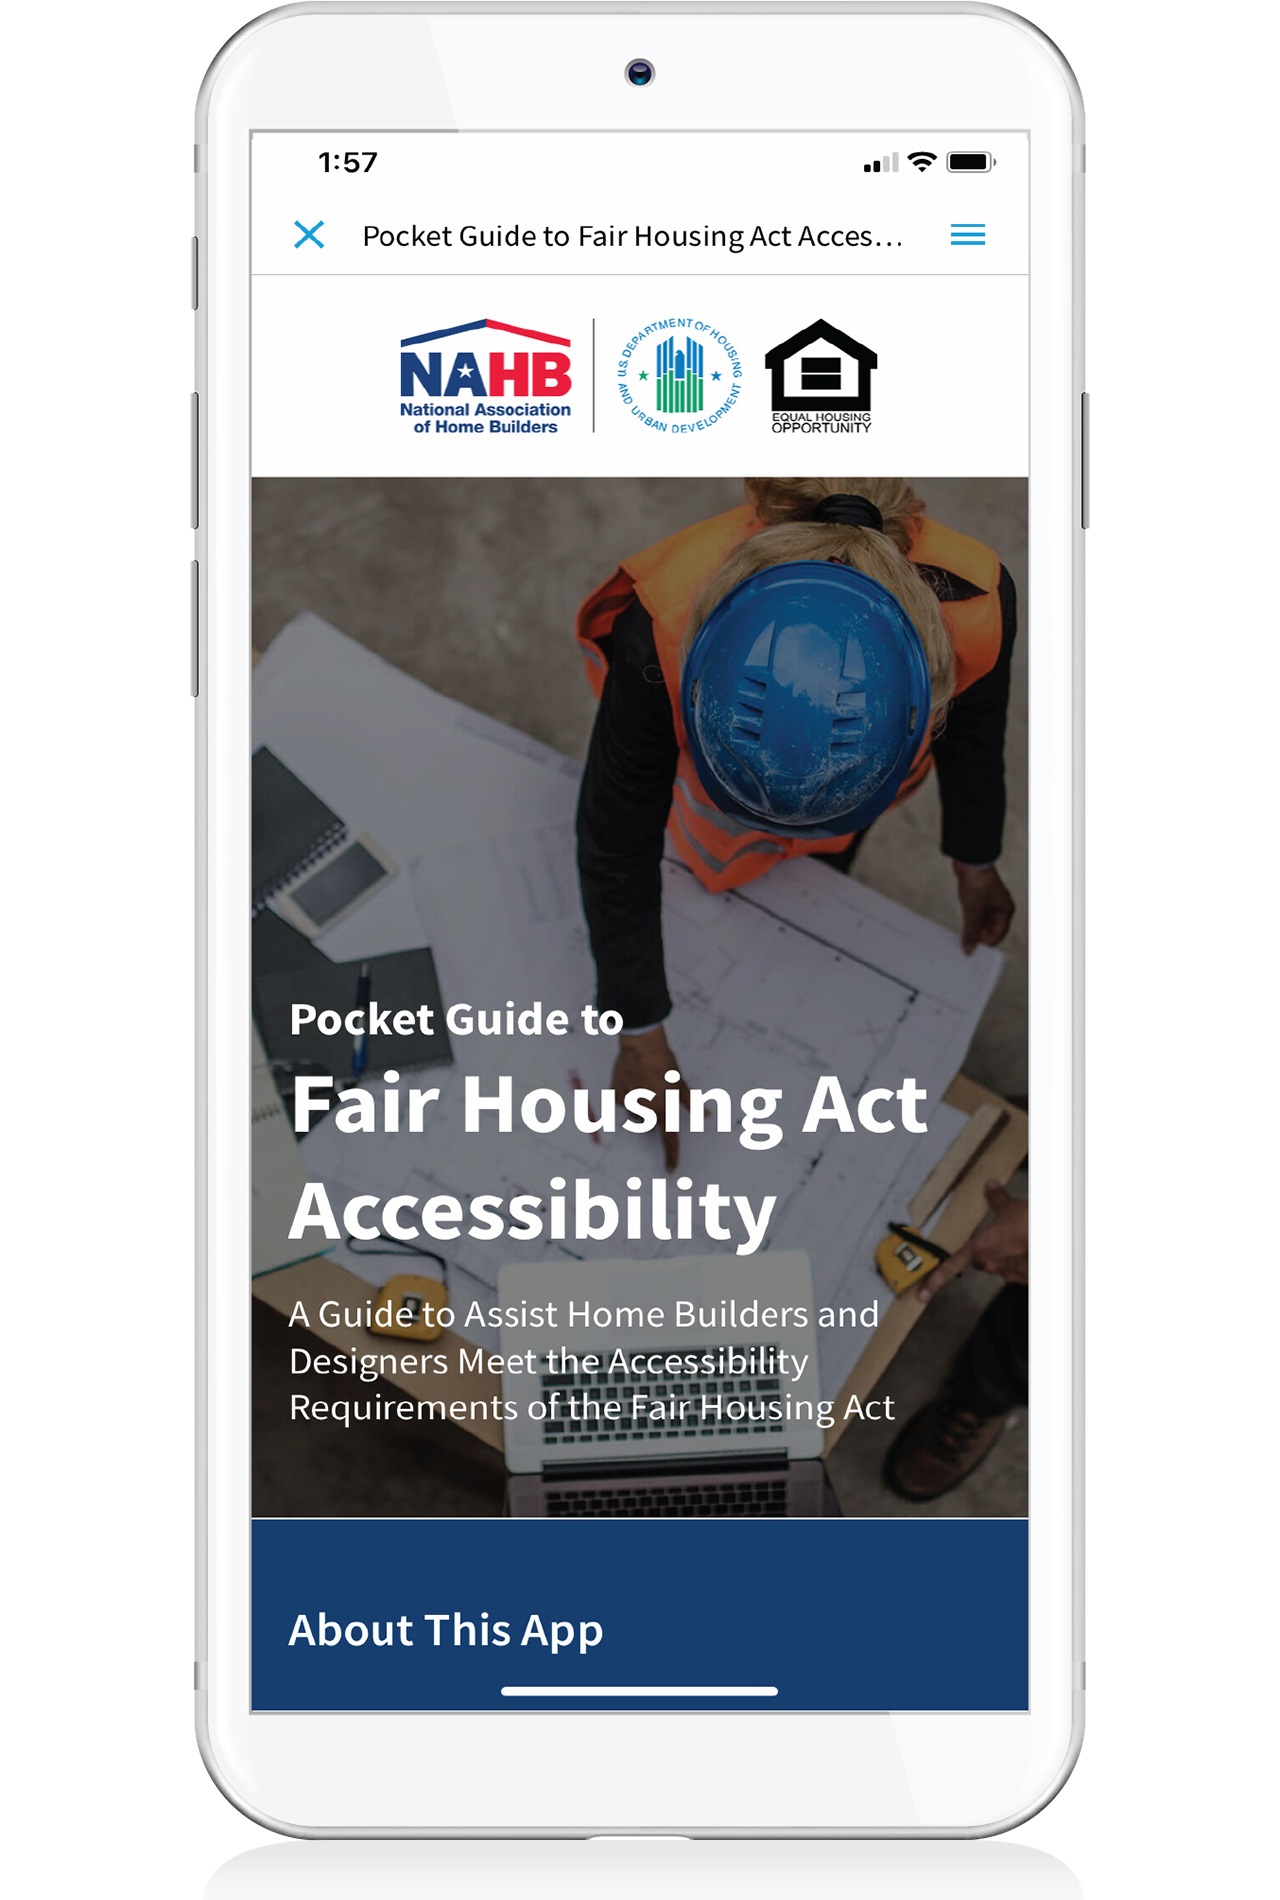 The Pocket Guide to Fair Housing Act Accessibility App